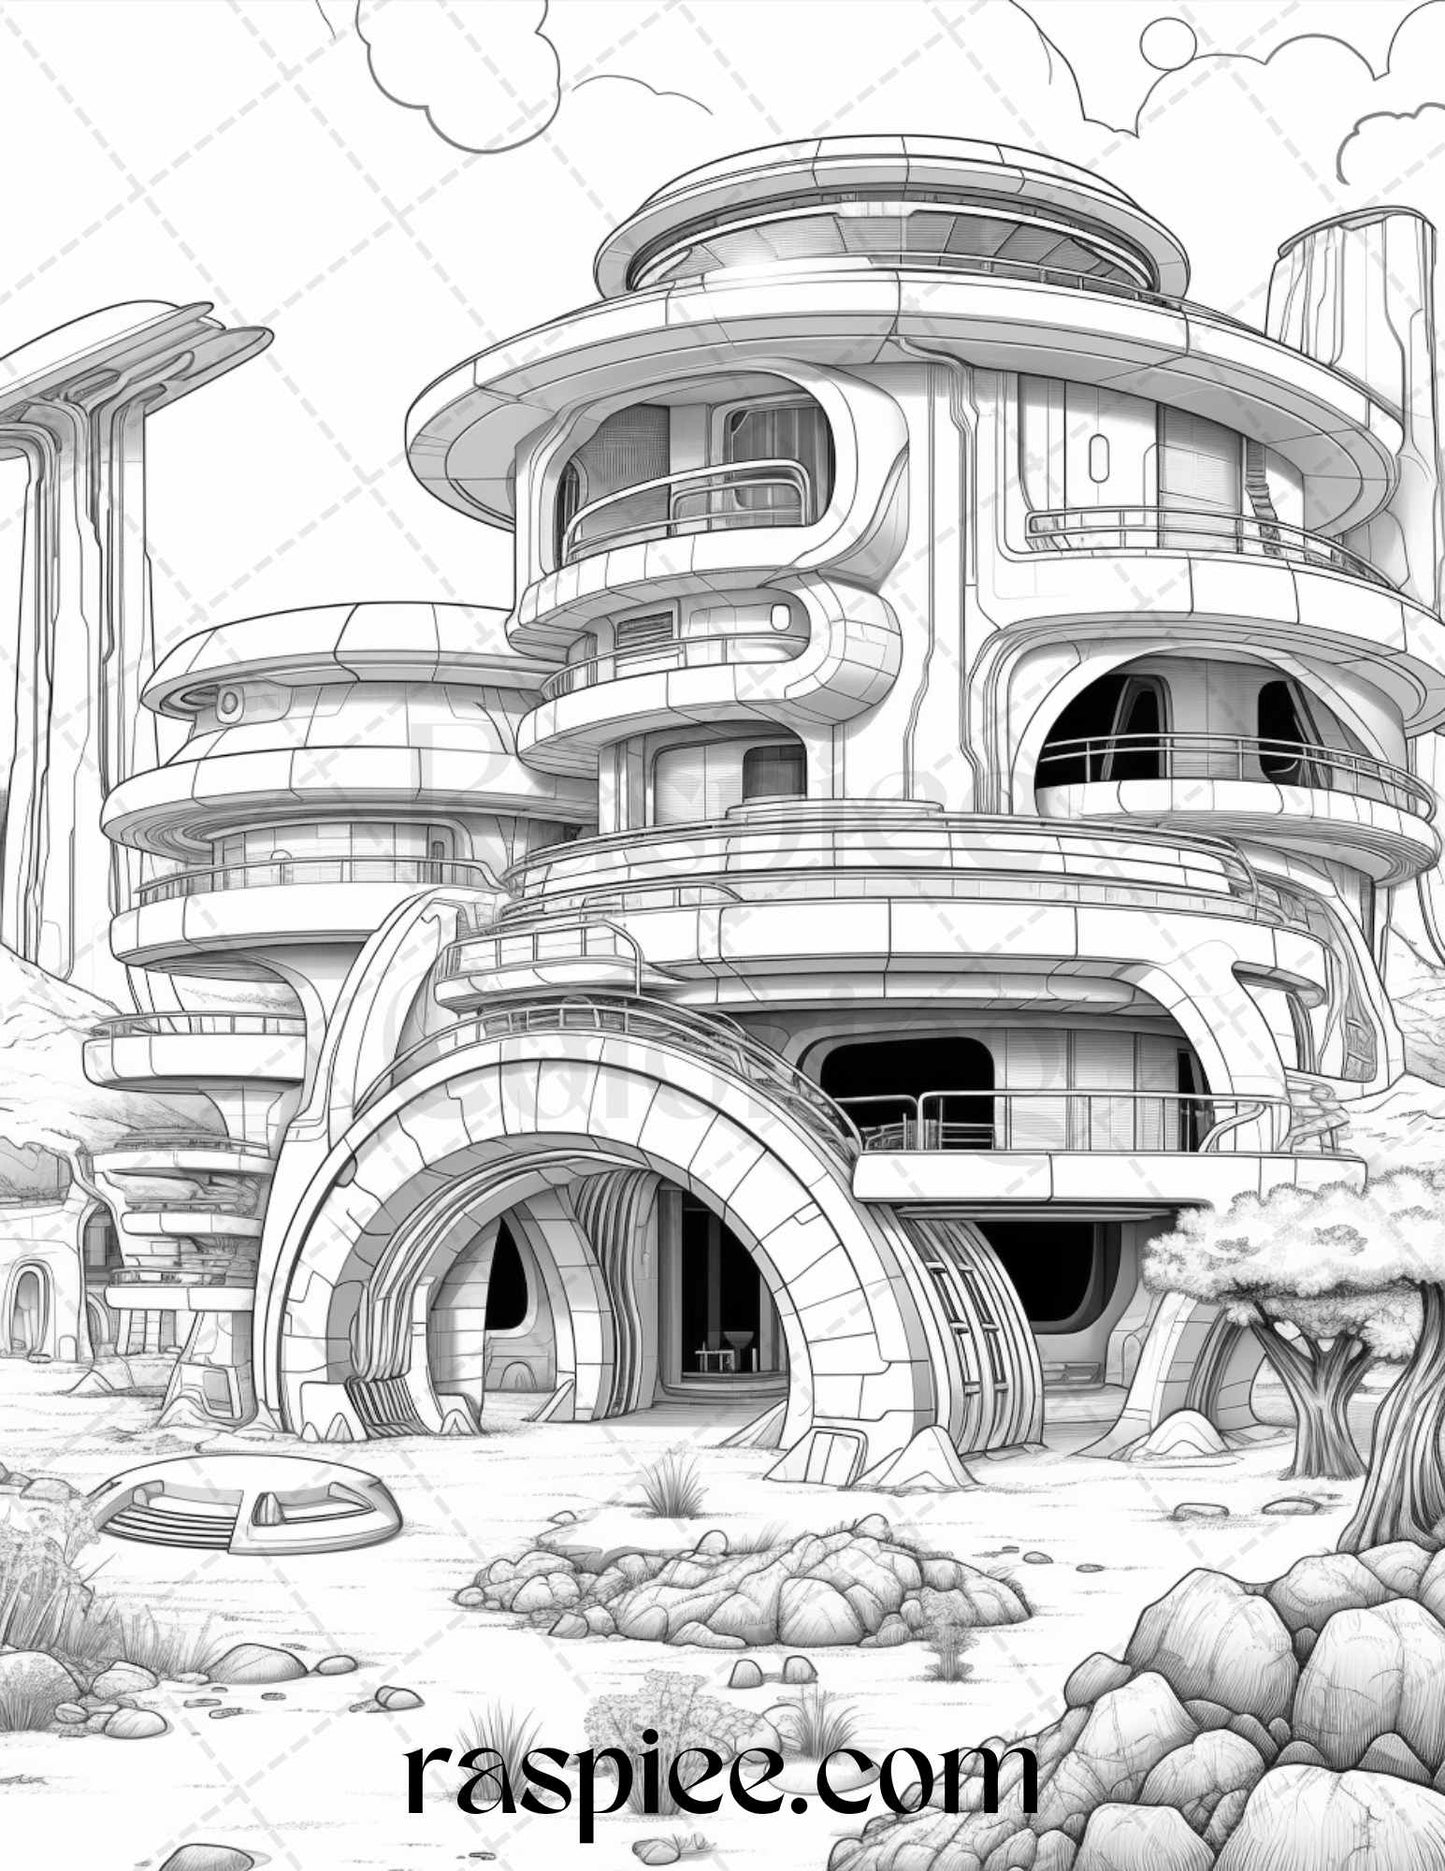 Futuristic Houses Coloring Pages, Printable Adult Coloring, Sci-Fi Architecture Coloring Pages, Urban Future Scenes Coloring Pages, Architecture Coloring Pages